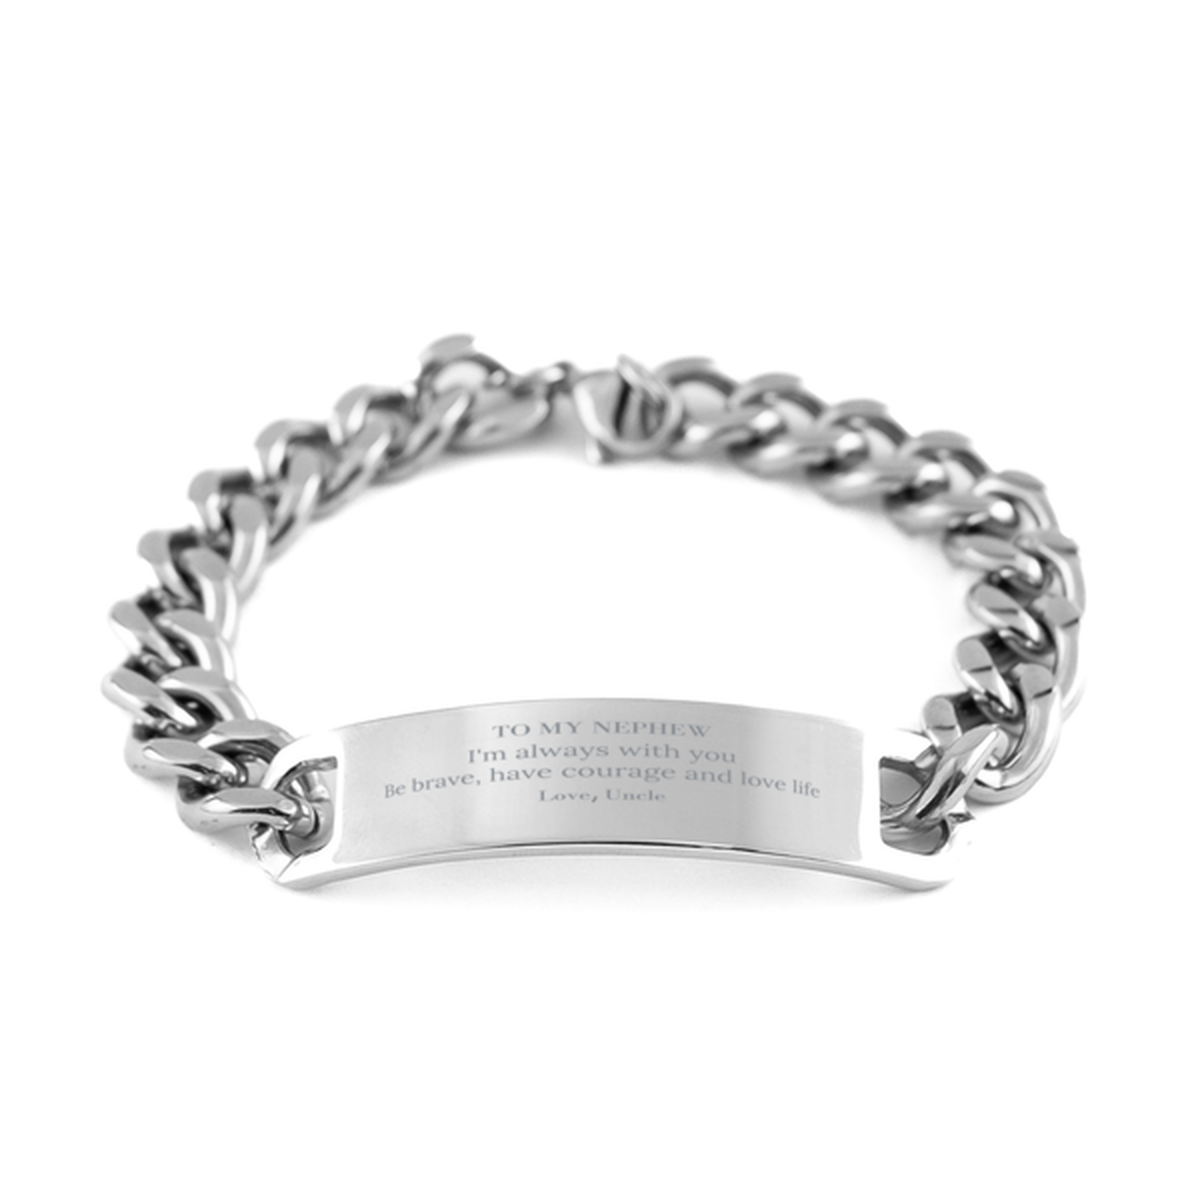 To My Nephew Gifts from Uncle, Unique Cuban Chain Stainless Steel Bracelet Inspirational Christmas Birthday Graduation Gifts for Nephew I'm always with you. Be brave, have courage and love life. Love, Uncle